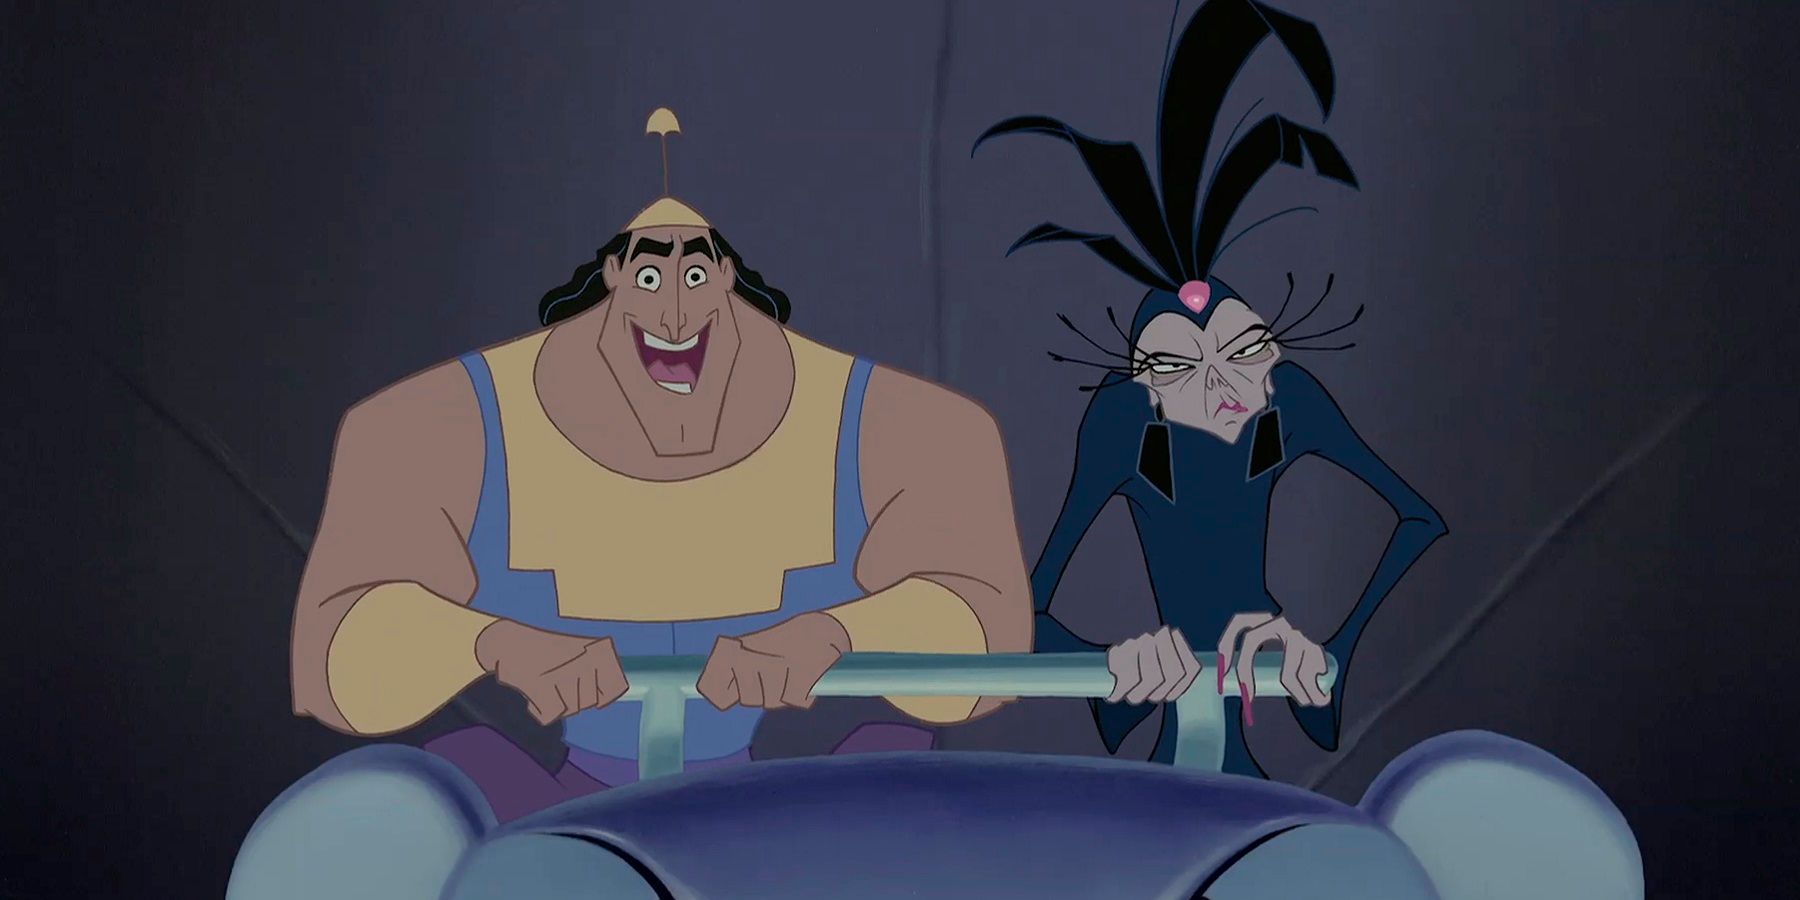 Kronk smiles and Yzma frowns while riding a cart